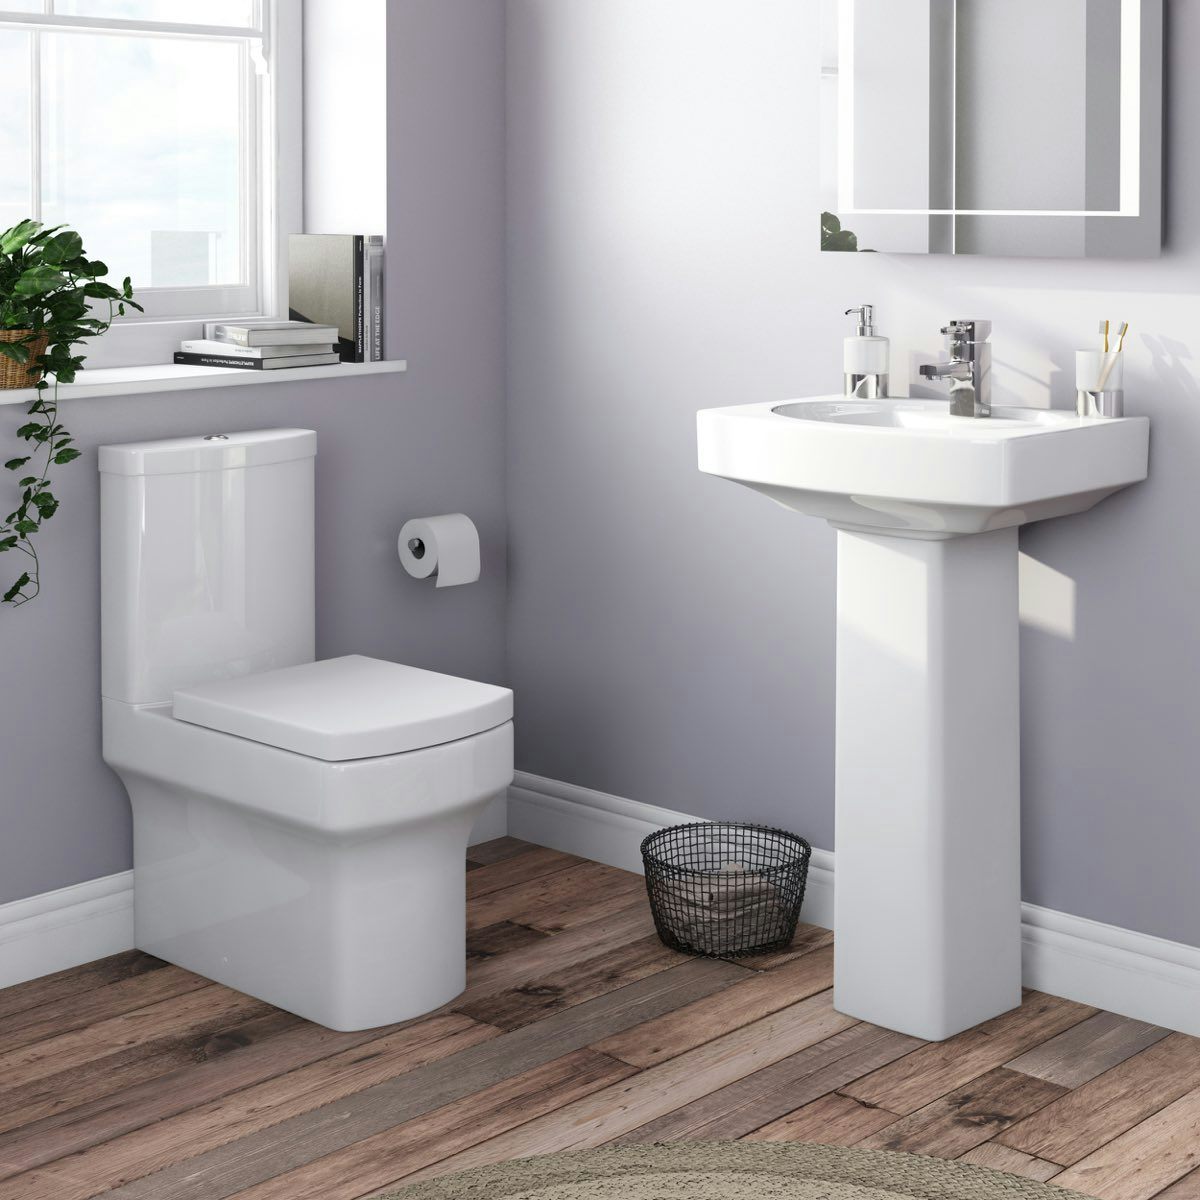 Orchard Wye cloakroom suite with full pedestal basin 555mm